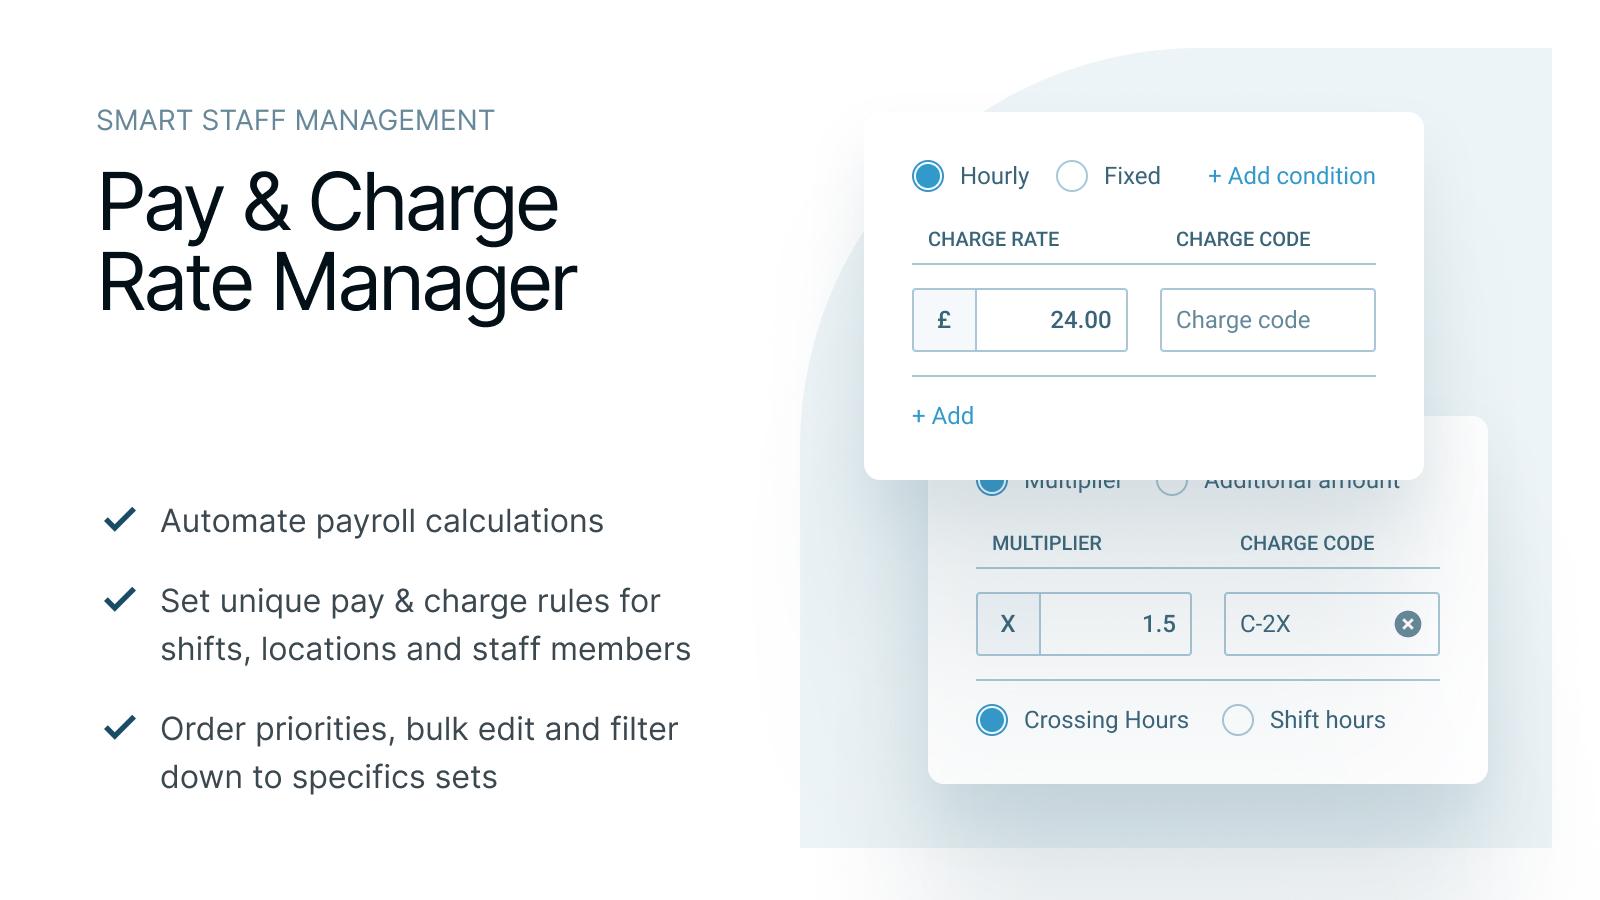 PARiM - Manage Pay & Charge Rates